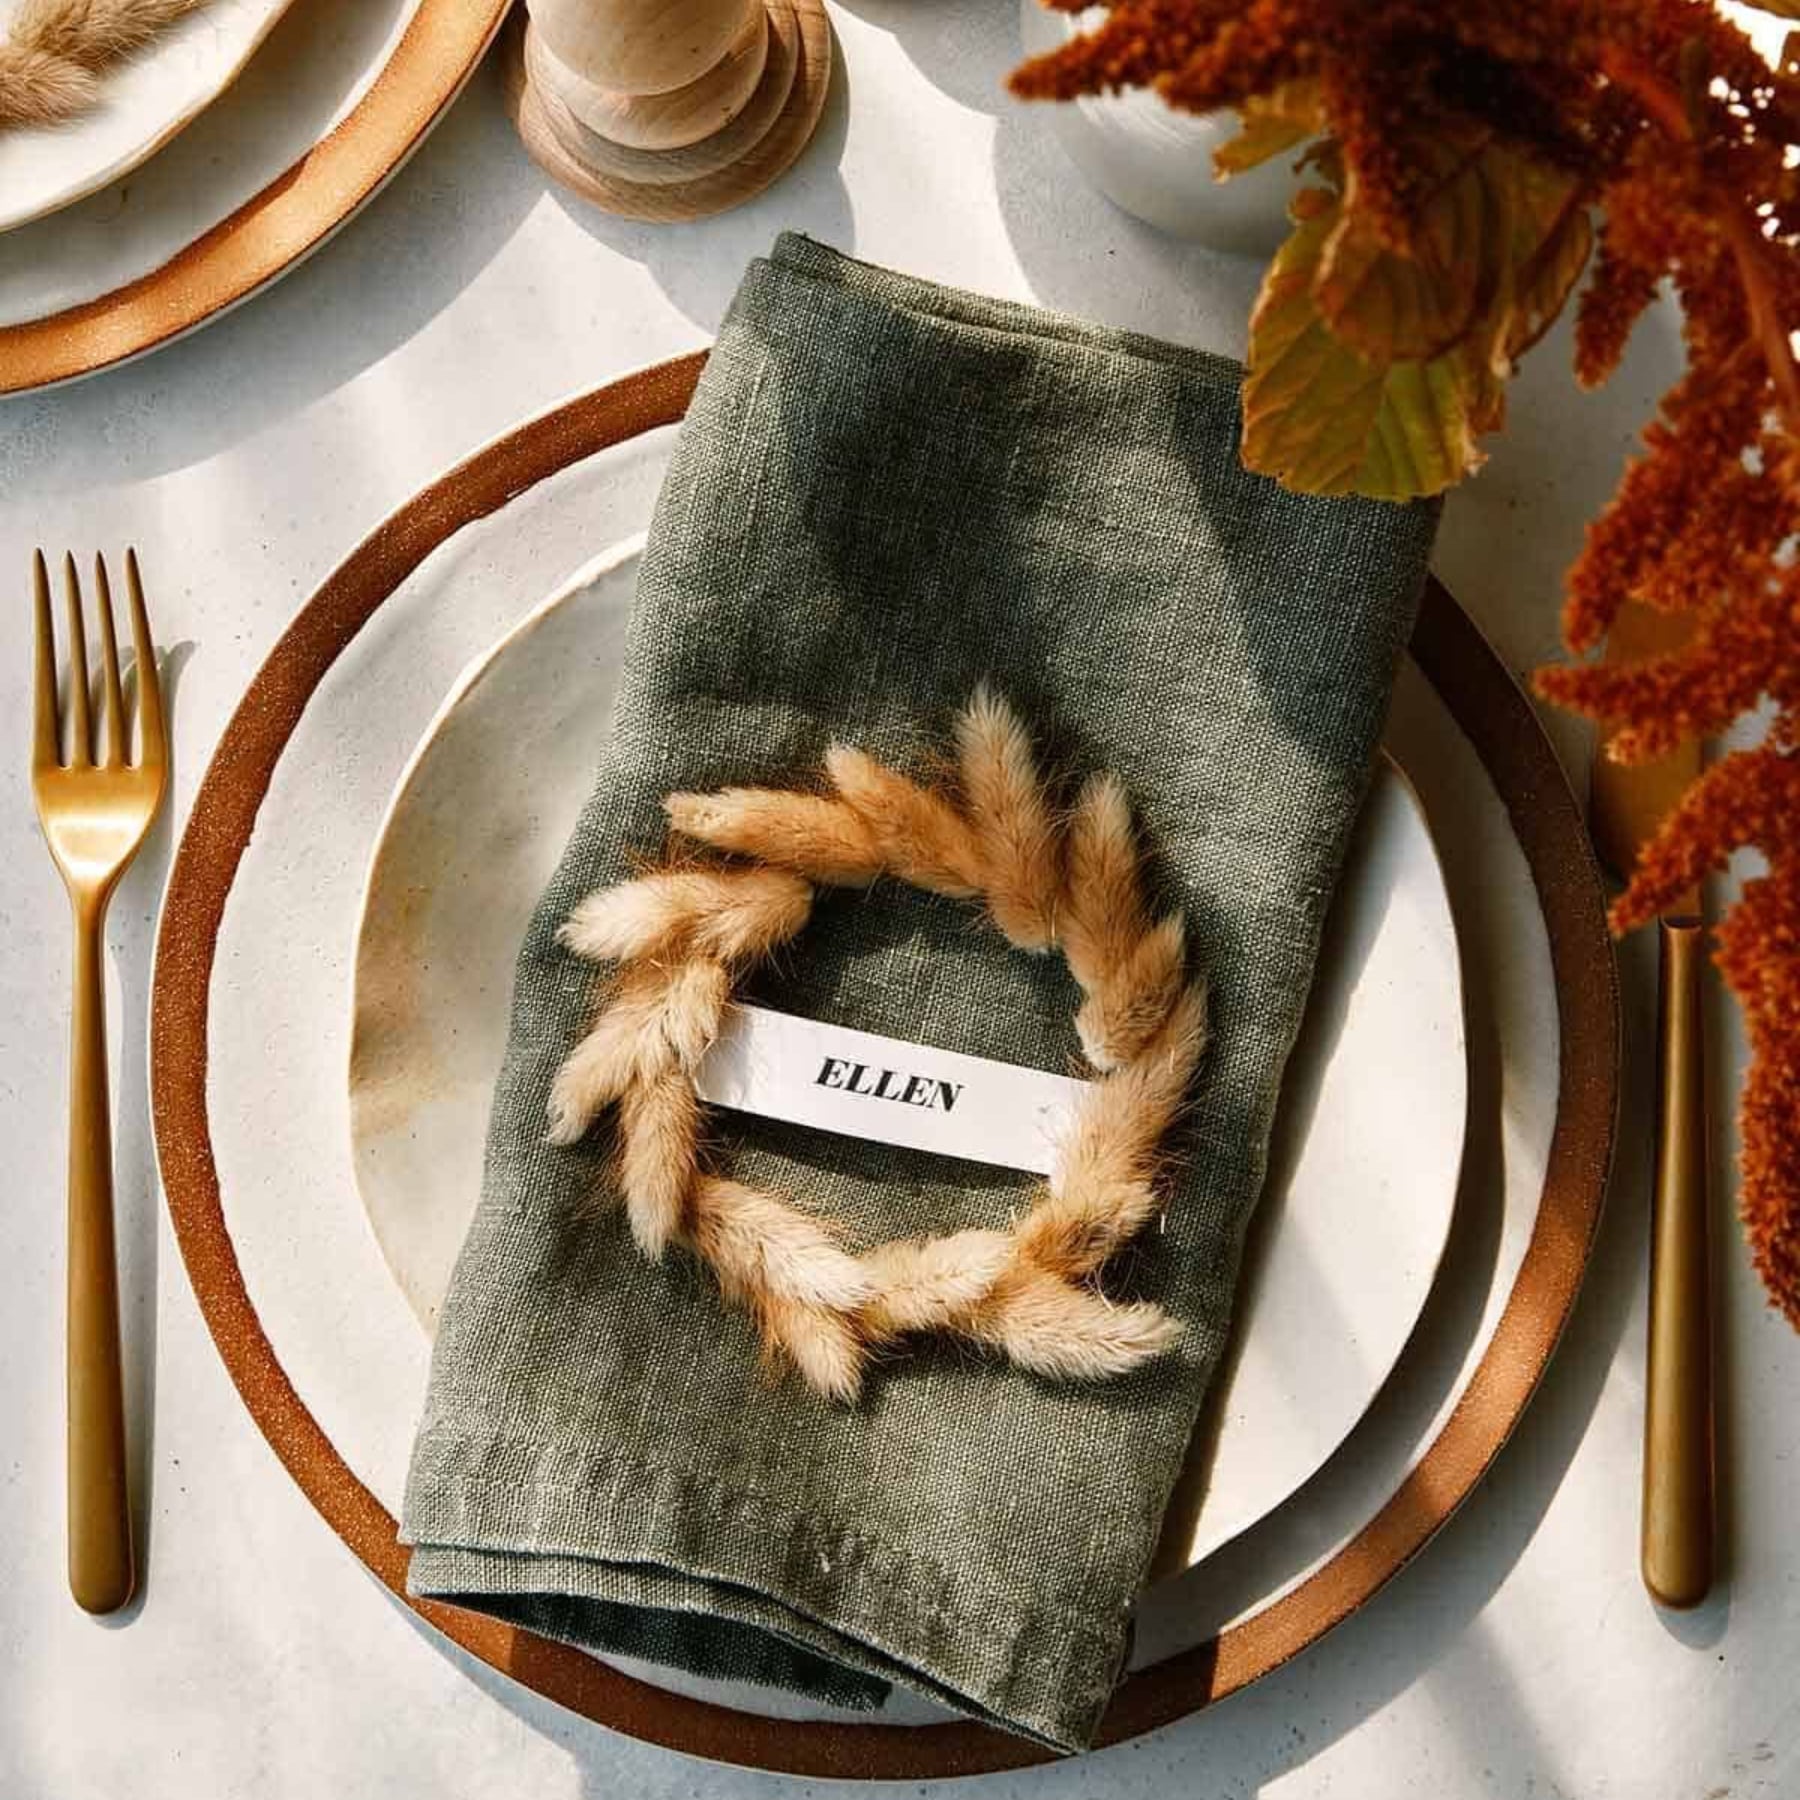 create personalized placemats for your guests with handwritten notes